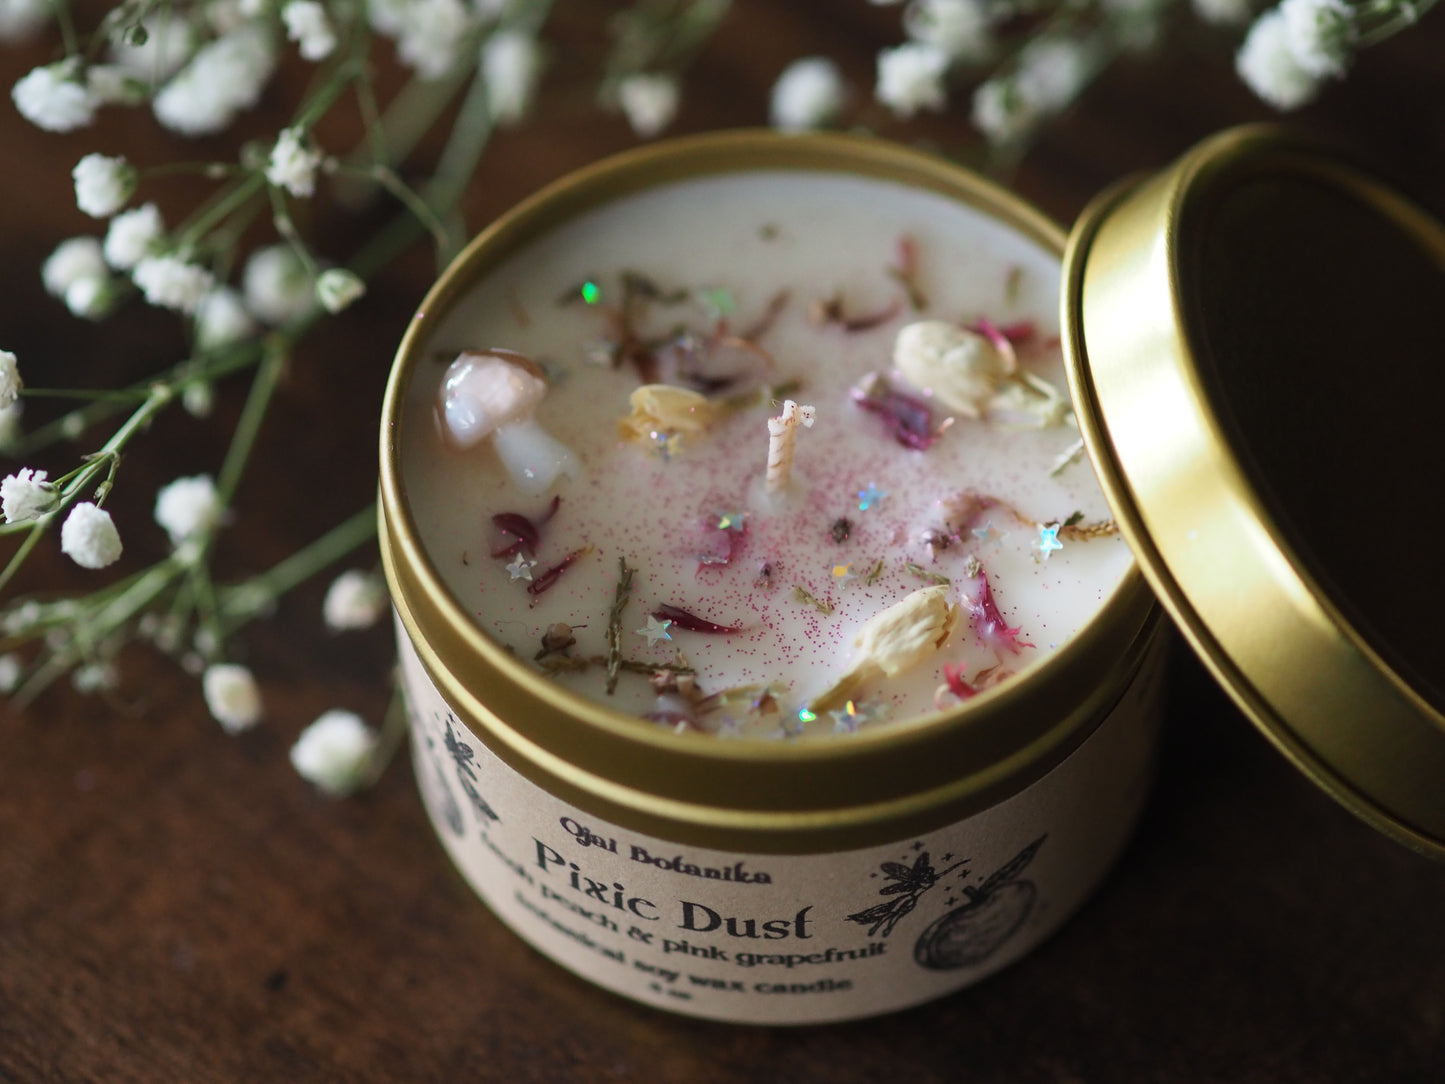 Pixie Dust - Peach & Pink Grapefruit - Botanical Soy Candle